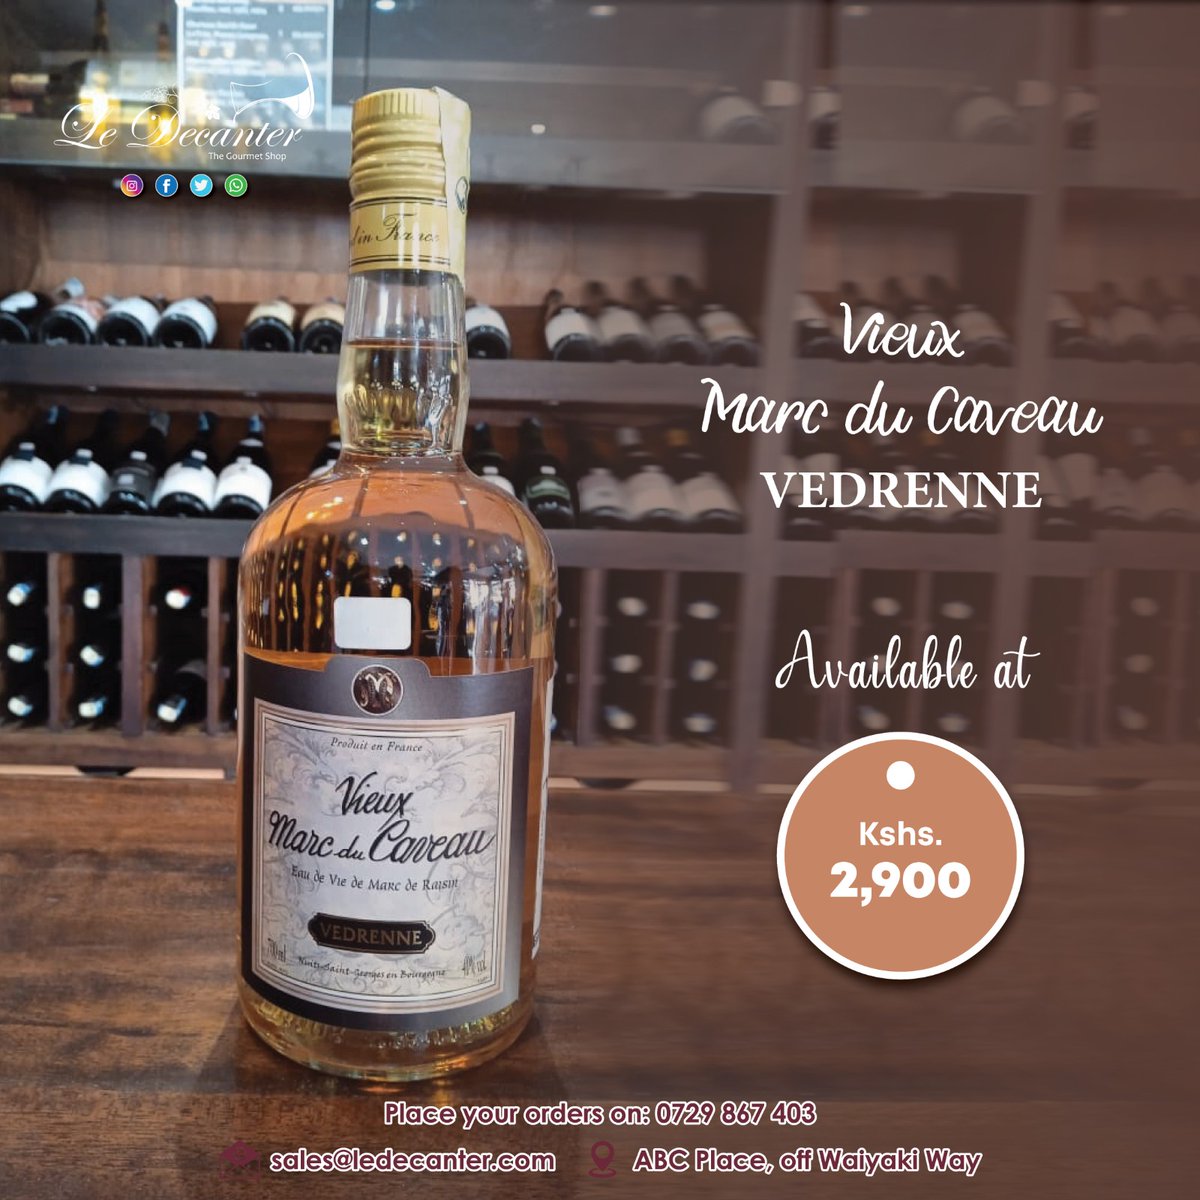 Vieux Marc Du Caveau is available at our shop for only 2,900/ To order kindly Call / WhatsApp us on 0729867403 Email us on sales@ledecanter.com #ledecanter #ledecanterspirits